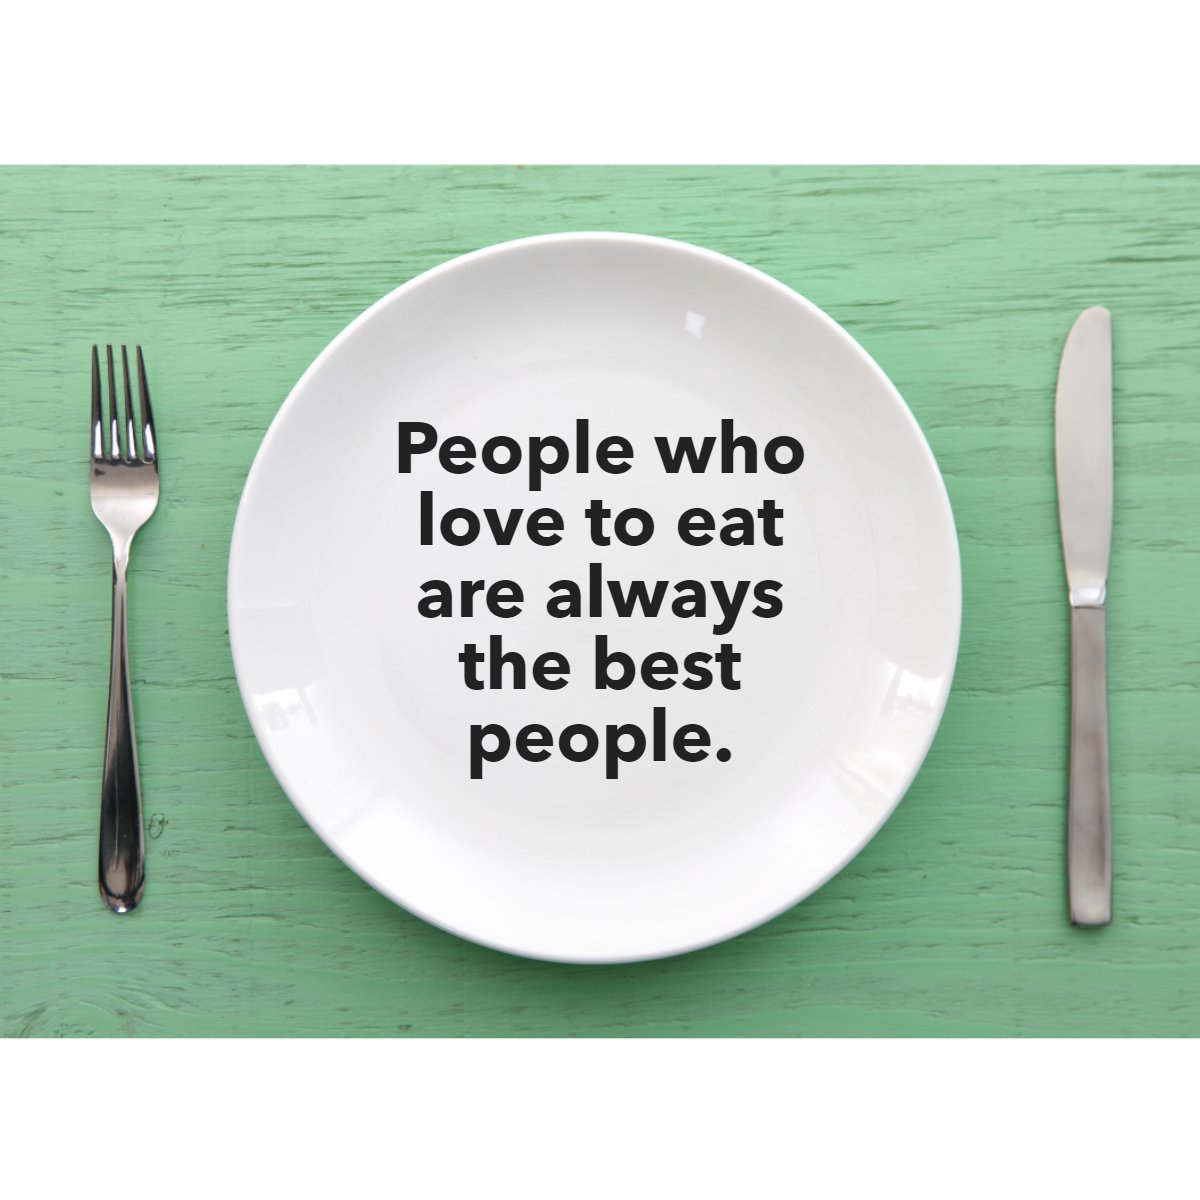 'People who love to eat are always the best people.'  
— Julia Child 😊

#goodfood #goodpeople #goodmoodfood #goodtimeswithgoodpeople #foodisgood #goodtimeswithgreatpeople #goodfoodgoodlife
 #realestate #philadelphia